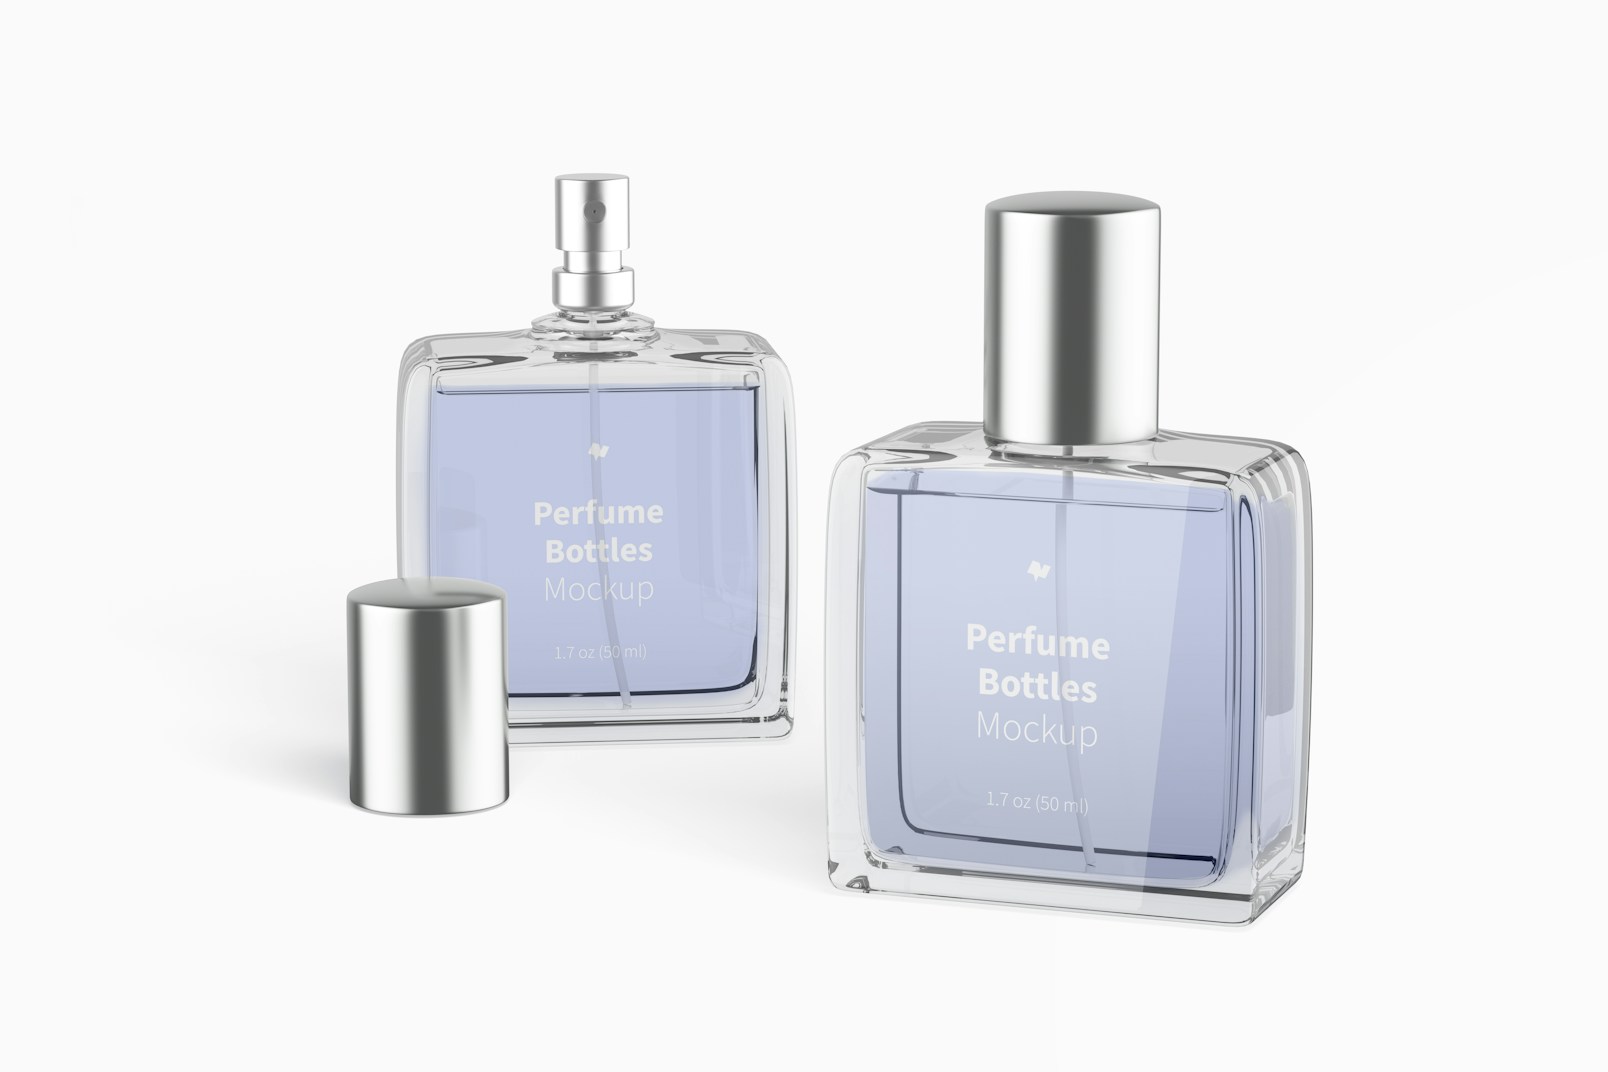 Perfume Bottles Mockup, Opened and Closed